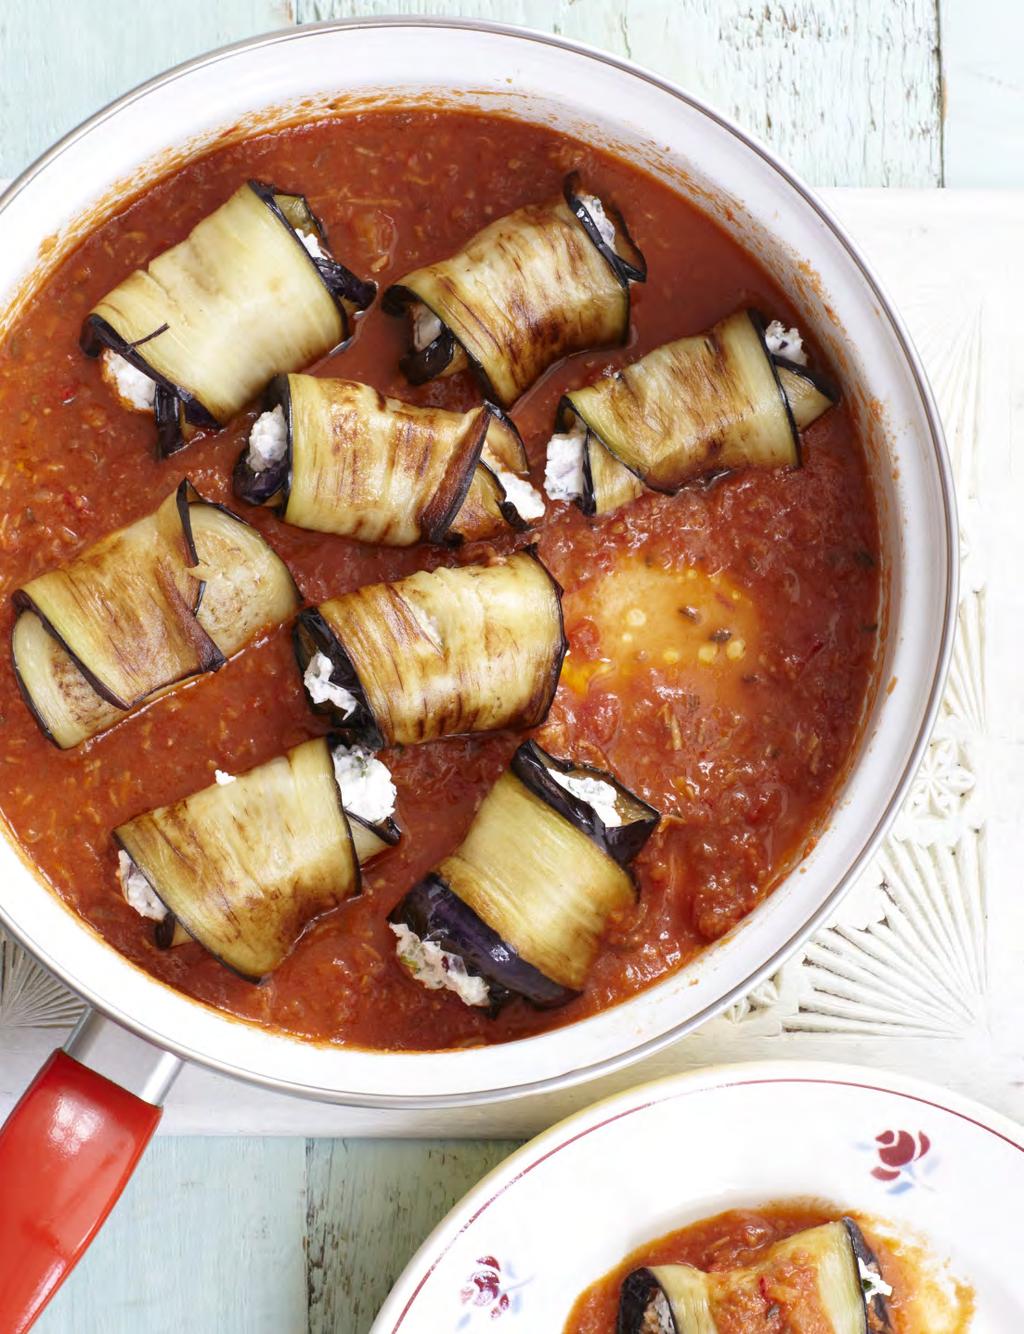 Ricotta-stuffed aubergines in tomato sauce This dish is so absolutely delicious that once you make it, you feel like doing it again the following night.